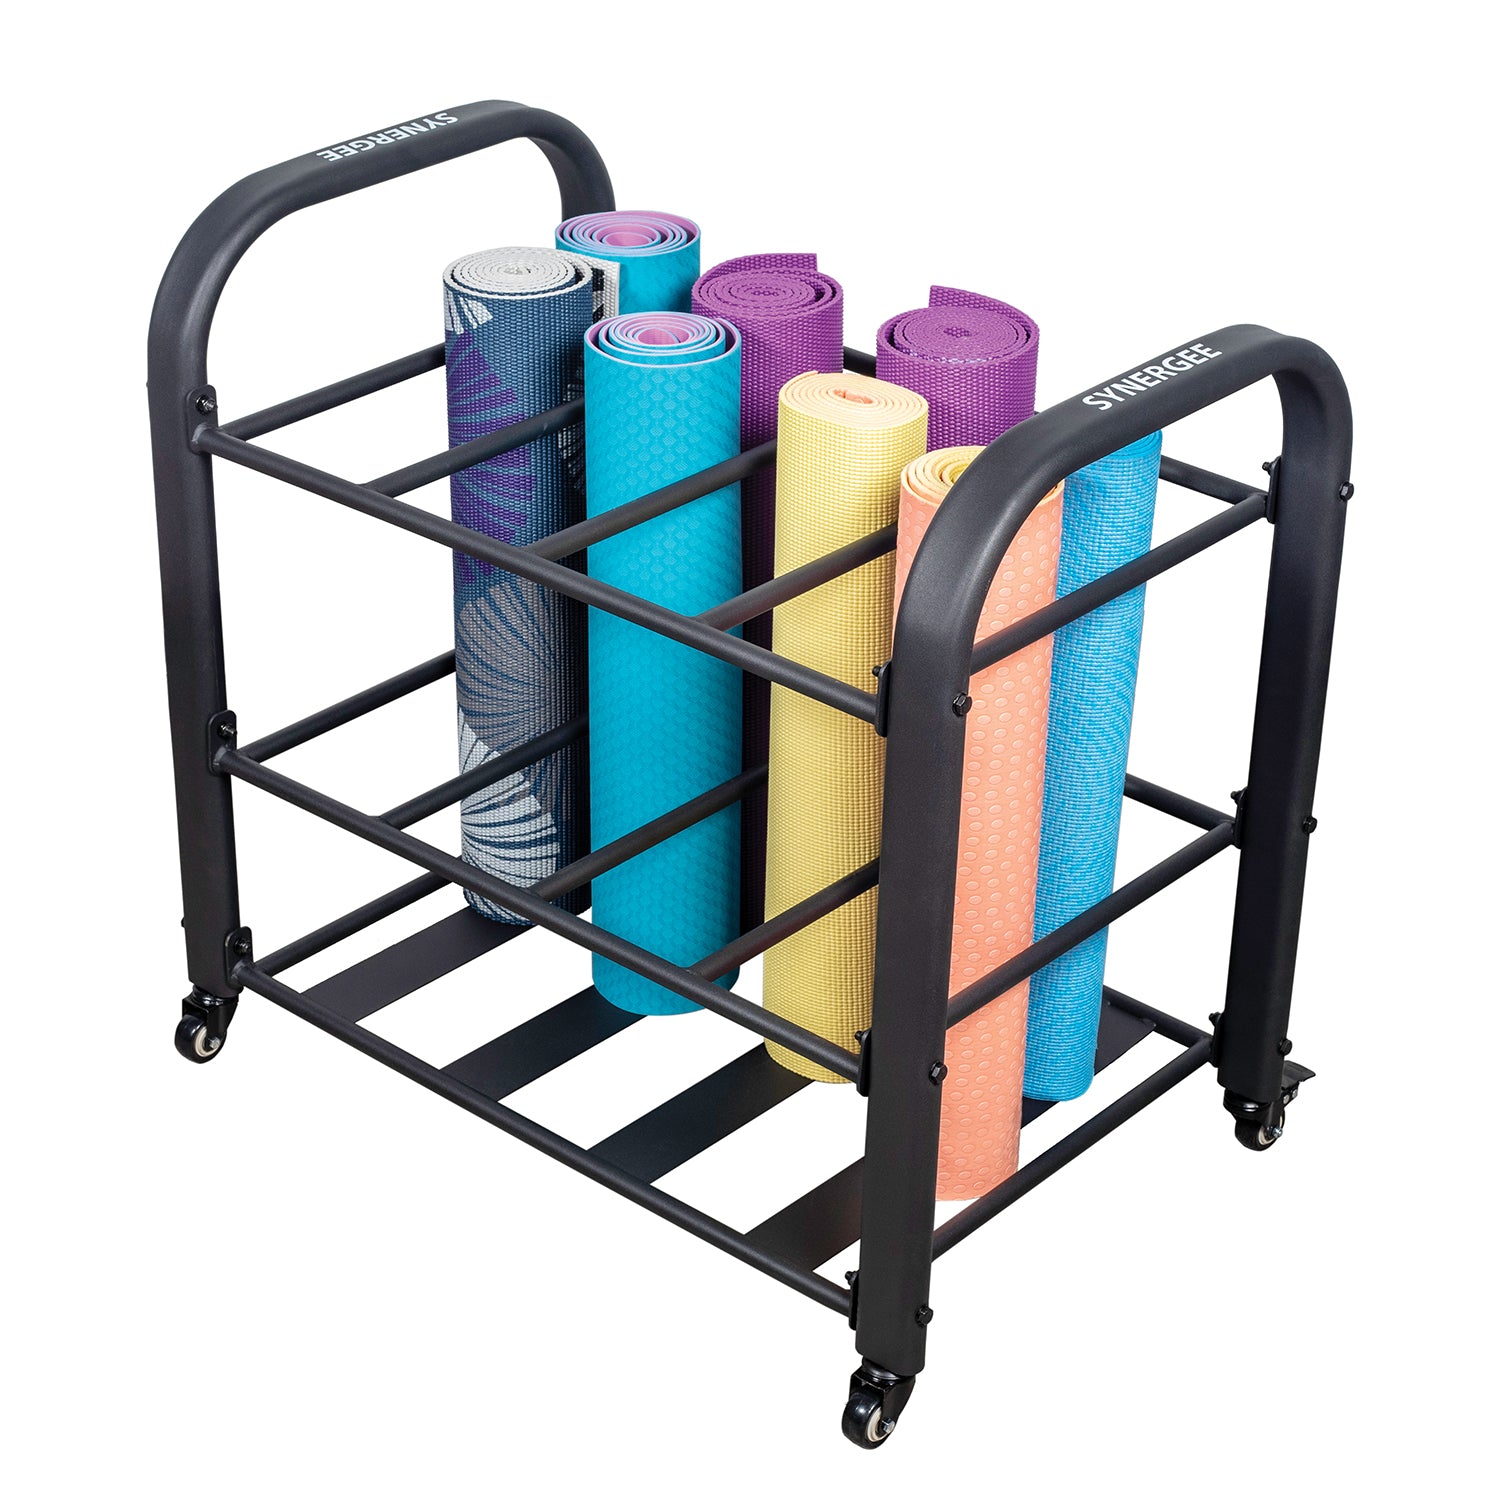 Dropship Yoga Mat Storage And Organizer Rack to Sell Online at a